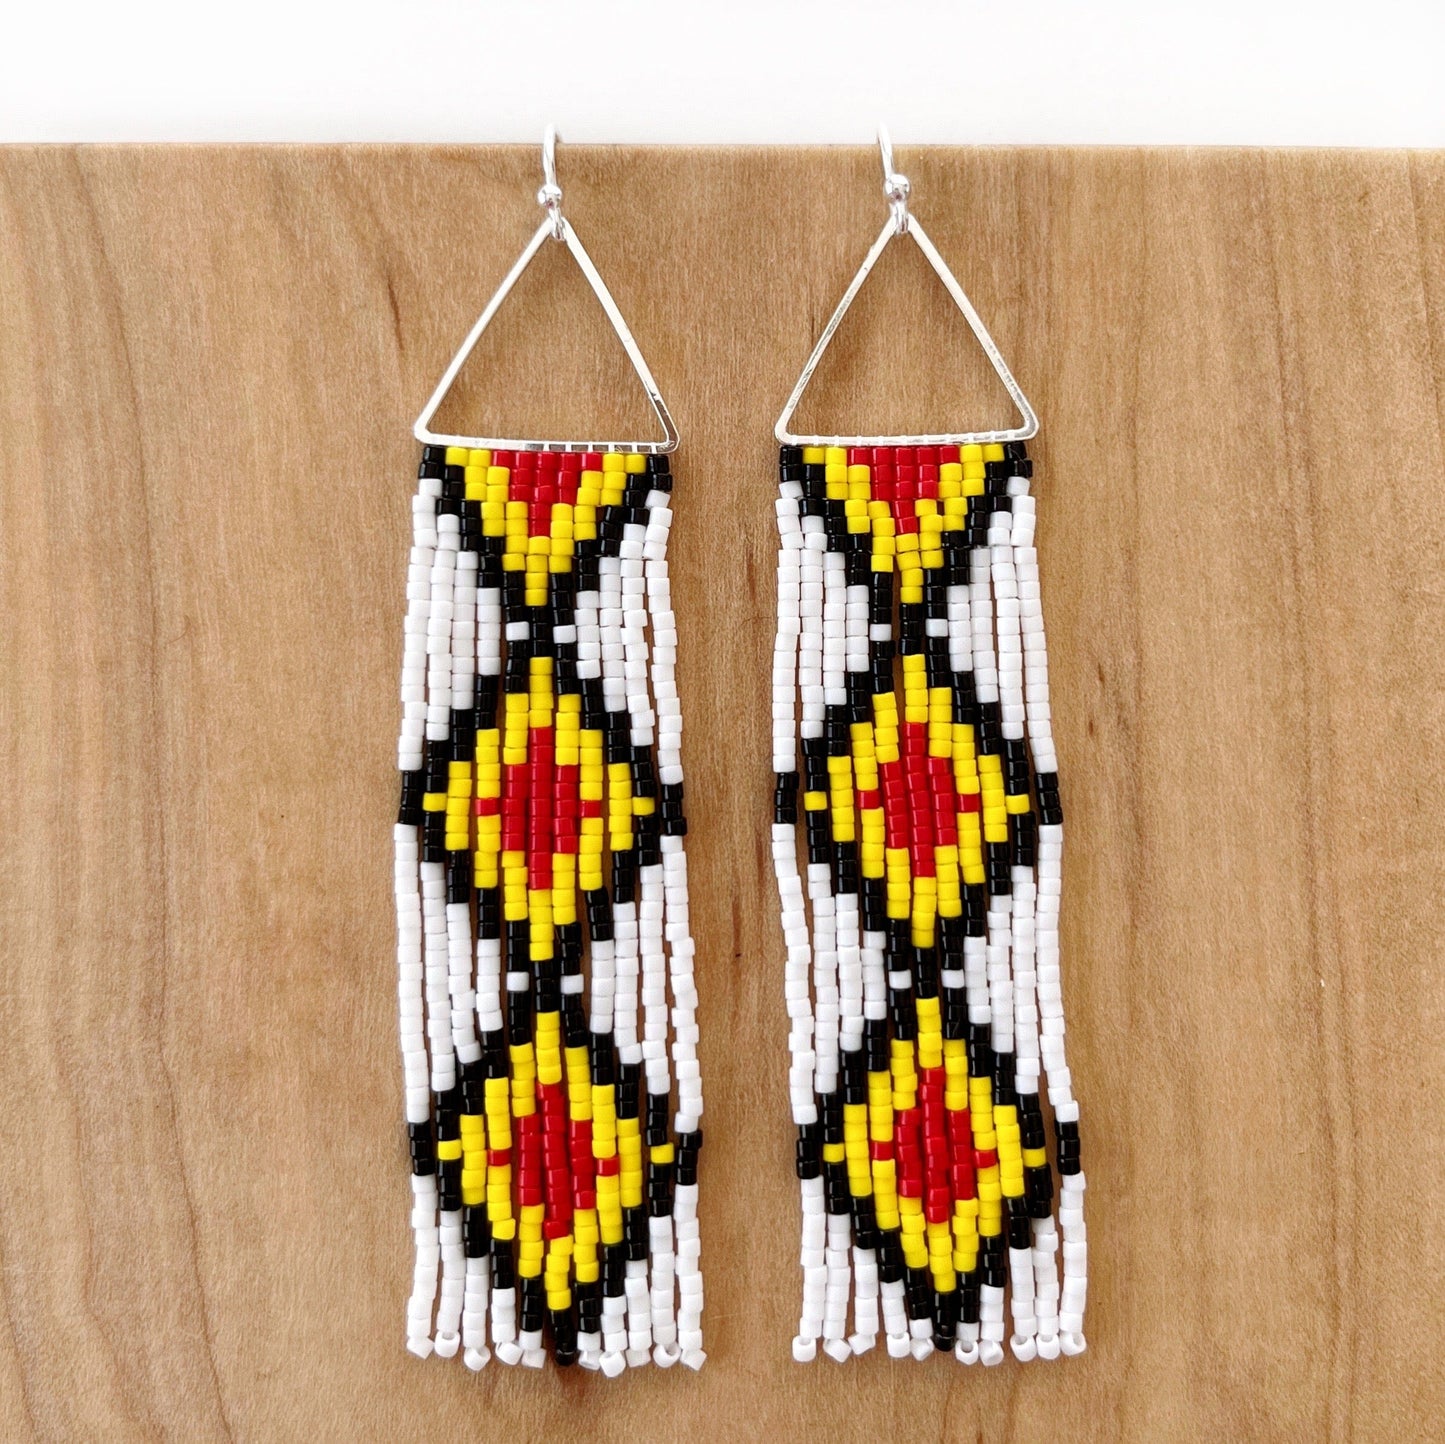 Lillie Nell Sinti Tuklo Earrings in Four Directions